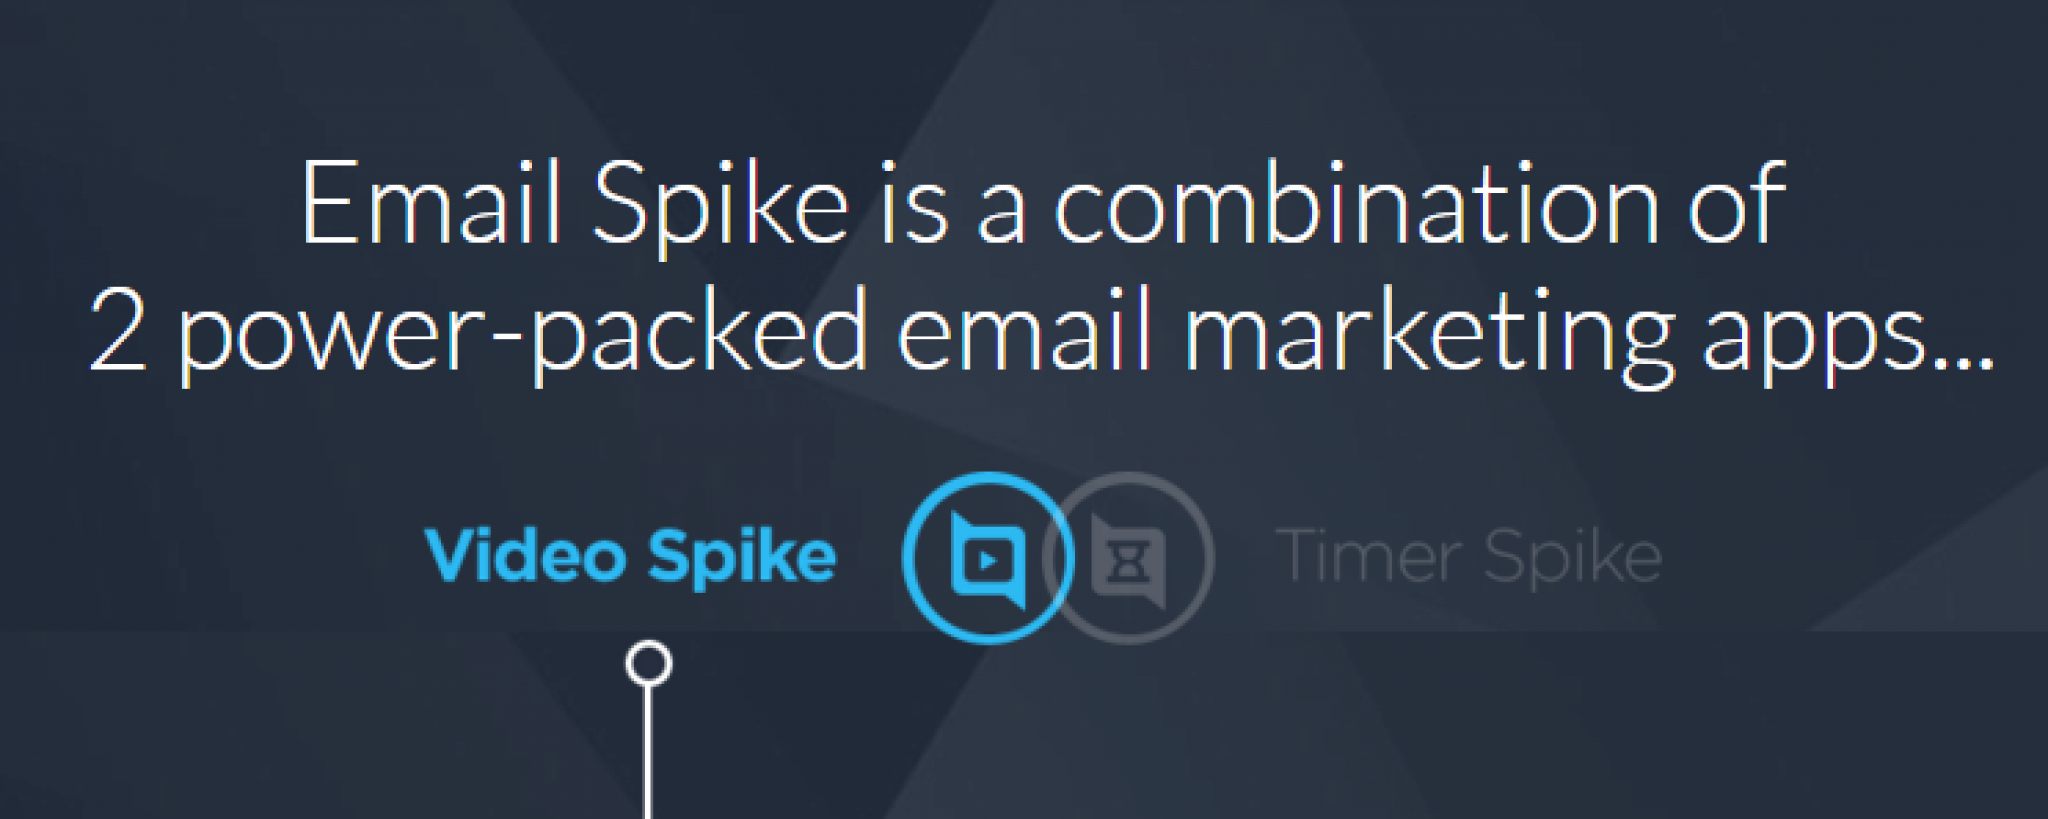 spike email review